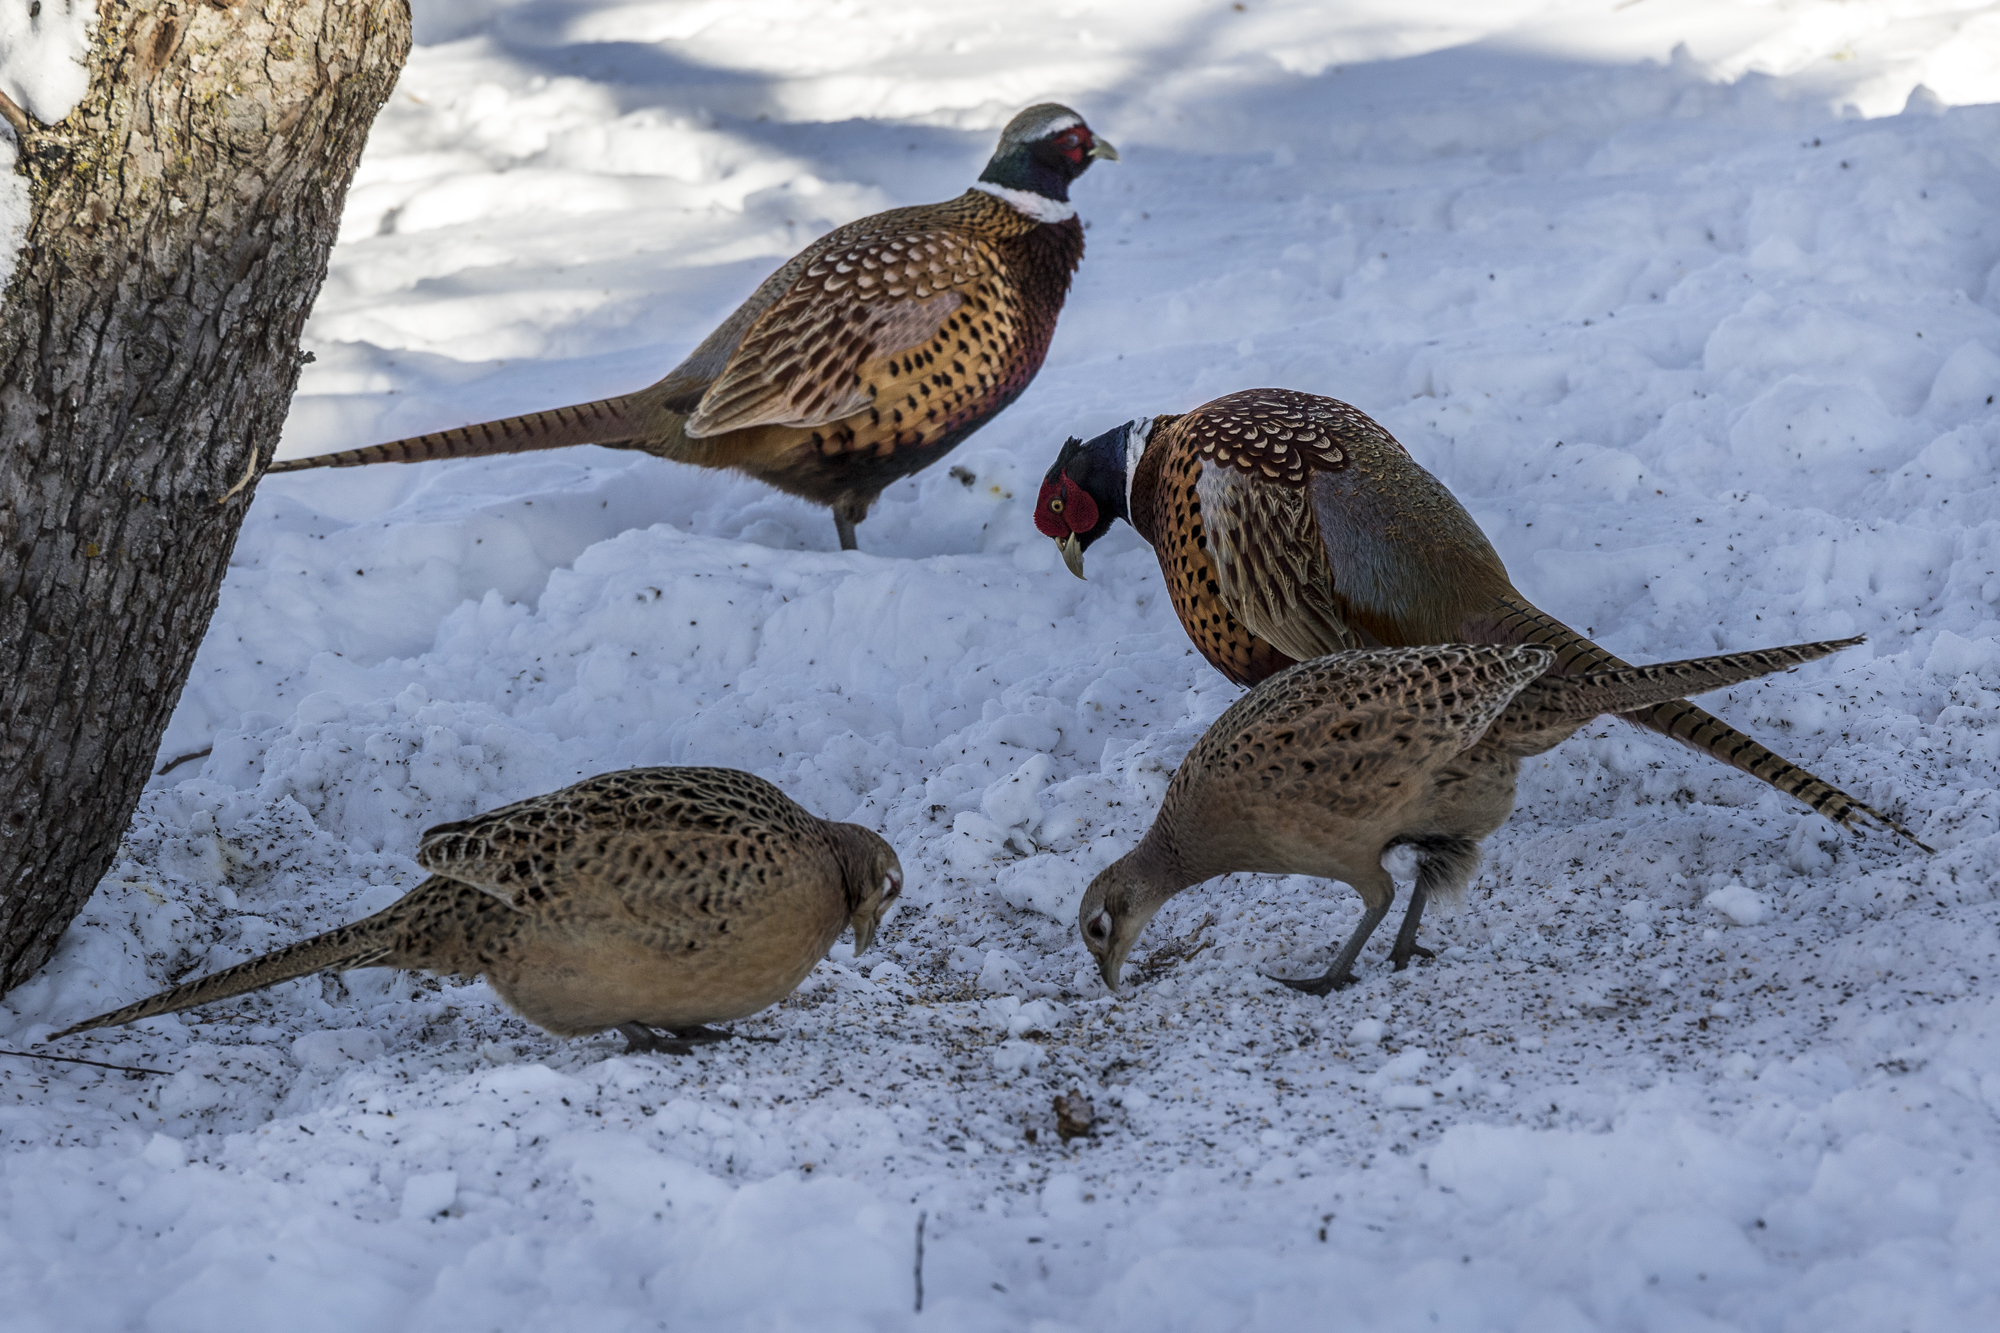 Wild pheasants at the feeders 20160214-680A9579